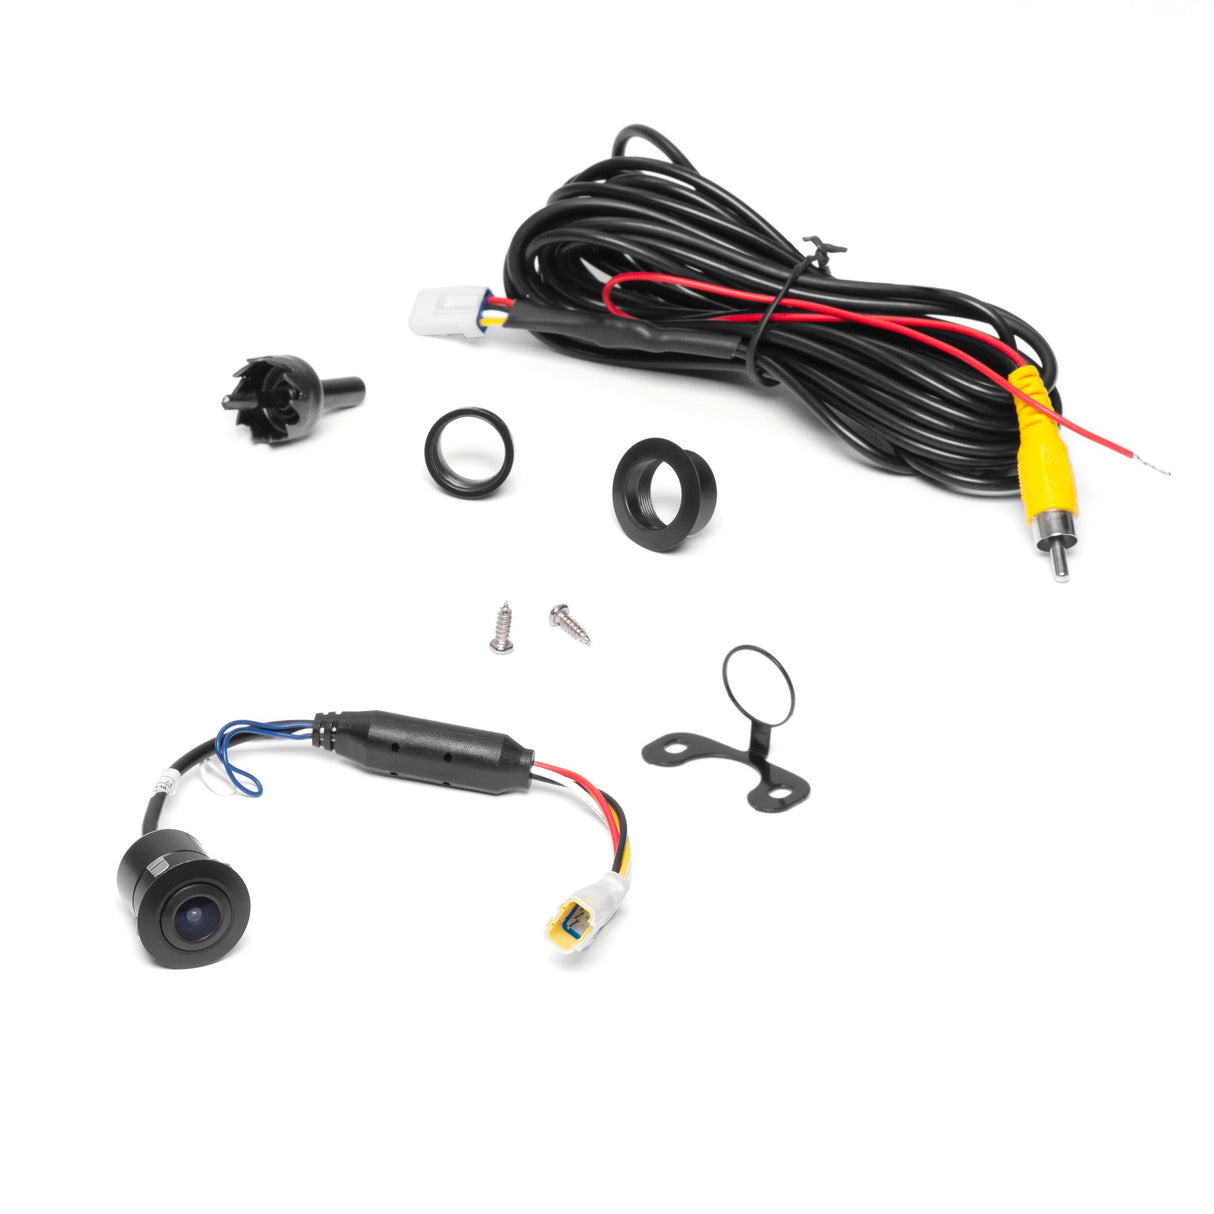 Boss Audio Rear View Camera Featuring Weather Proof